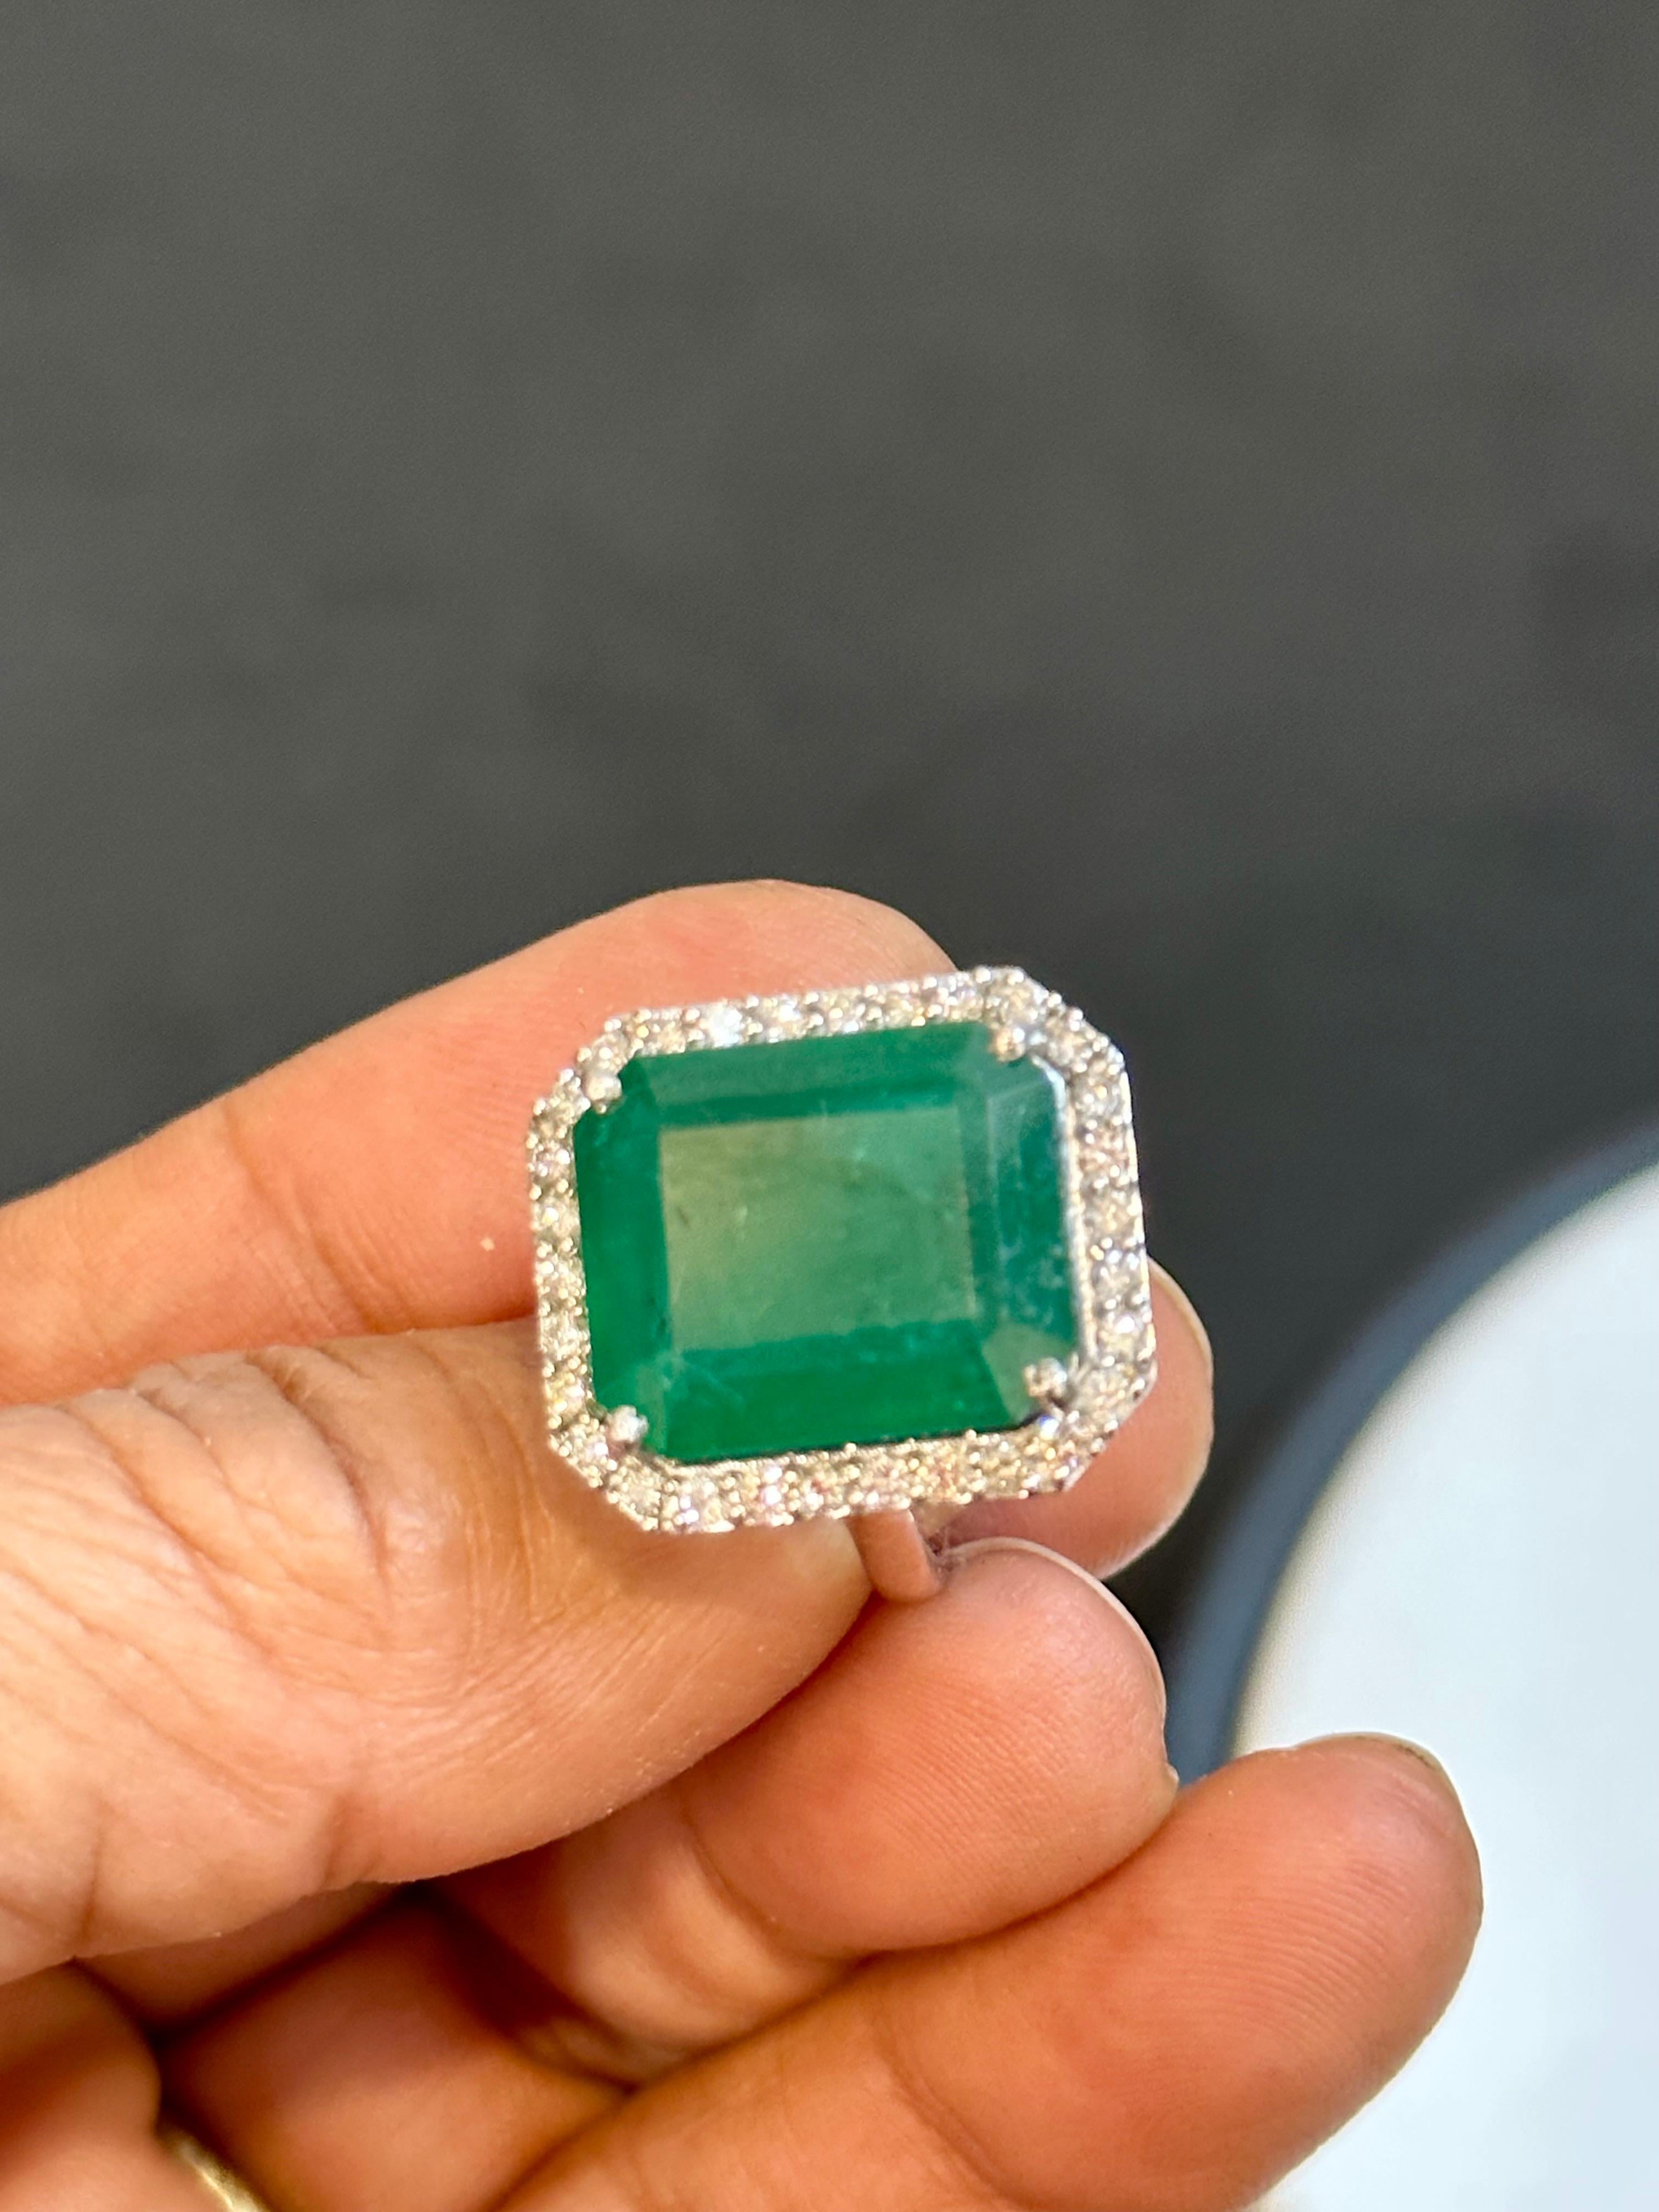 Natural 13 Carat Emerald Cut Zambian Emerald & Diamond Ring in 14kt White Gold In Excellent Condition For Sale In New York, NY